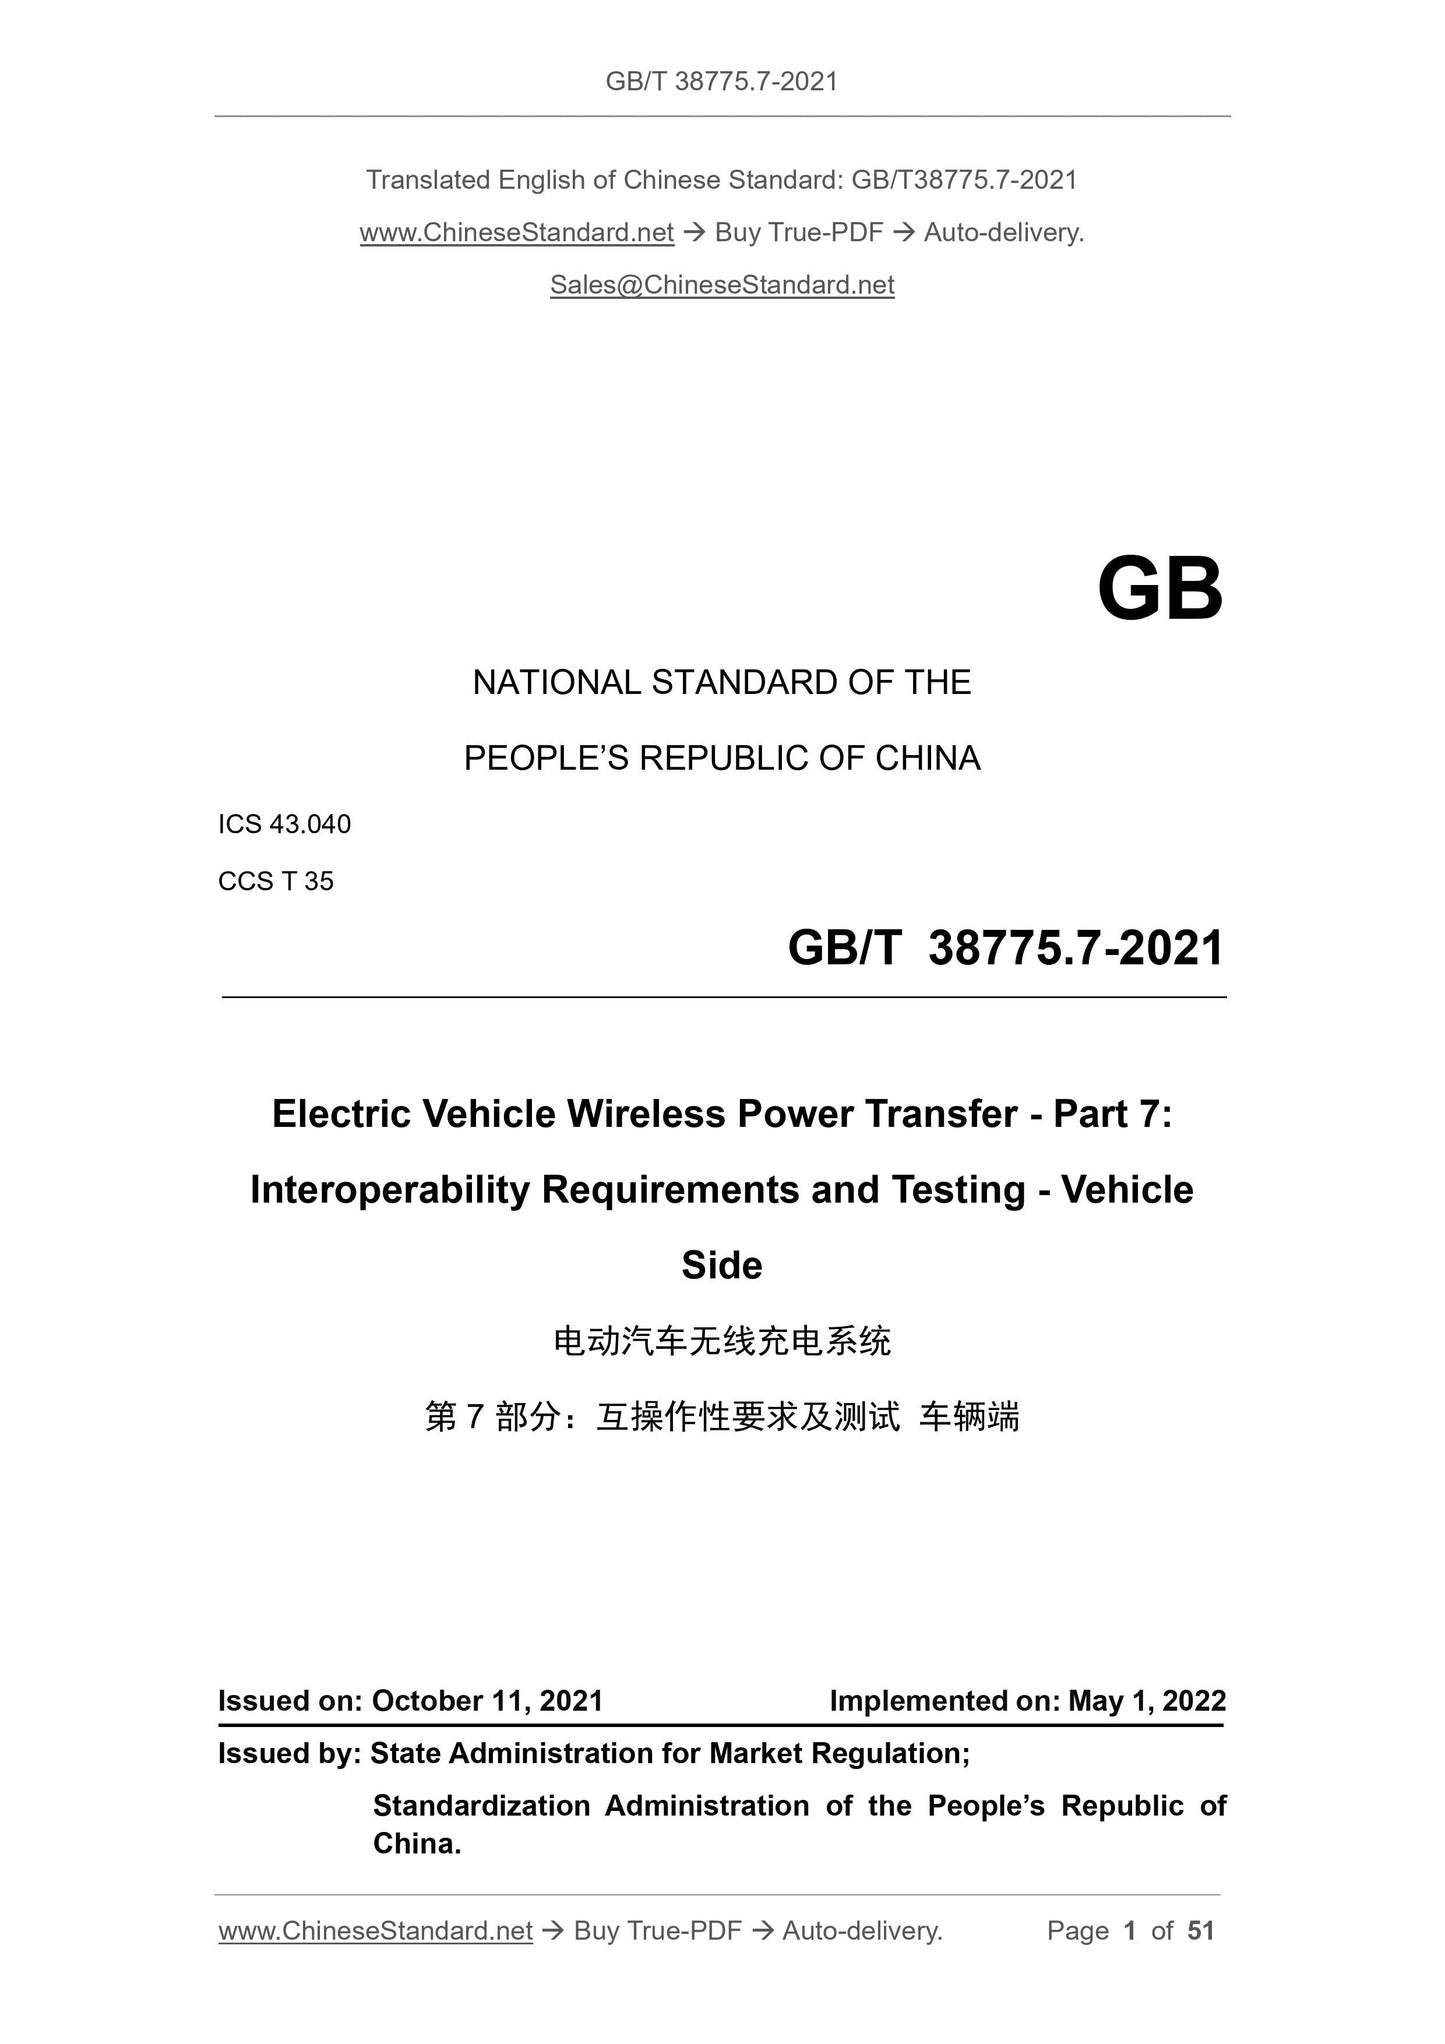 GB/T 38775.7-2021 Page 1